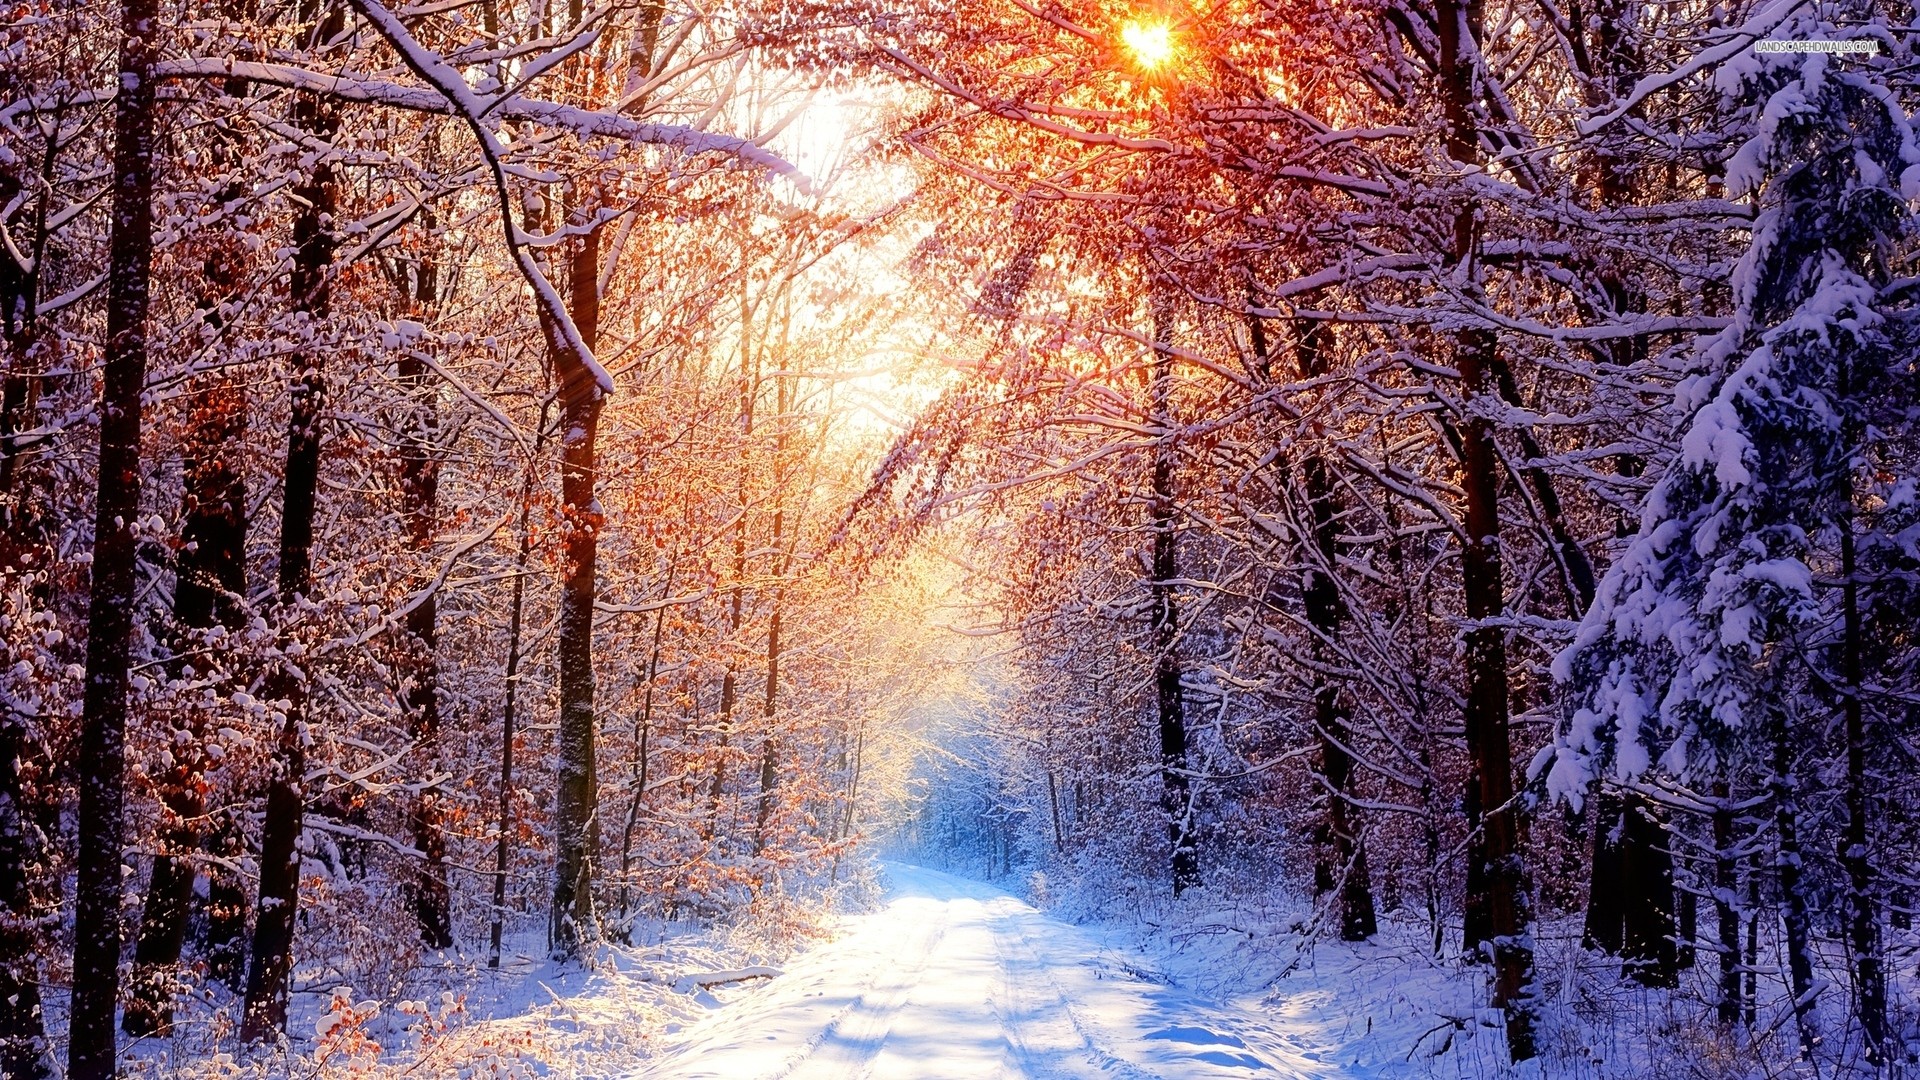 1920x1080 Winter Road in Forest wallpaper  1080p .